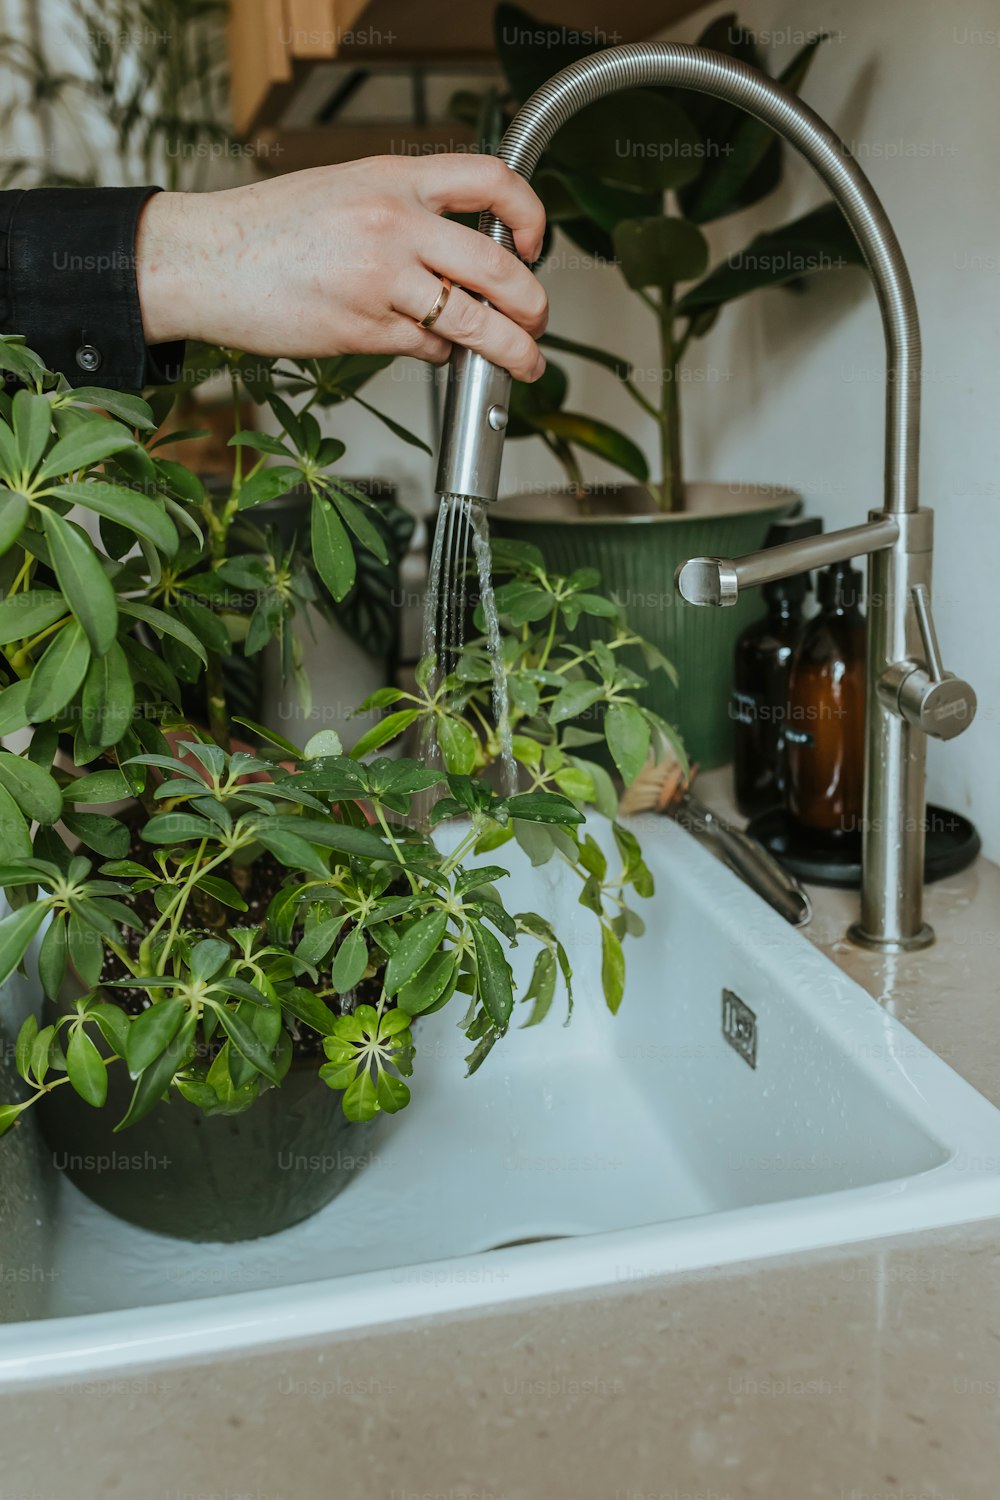 a person is washing plants in a sink